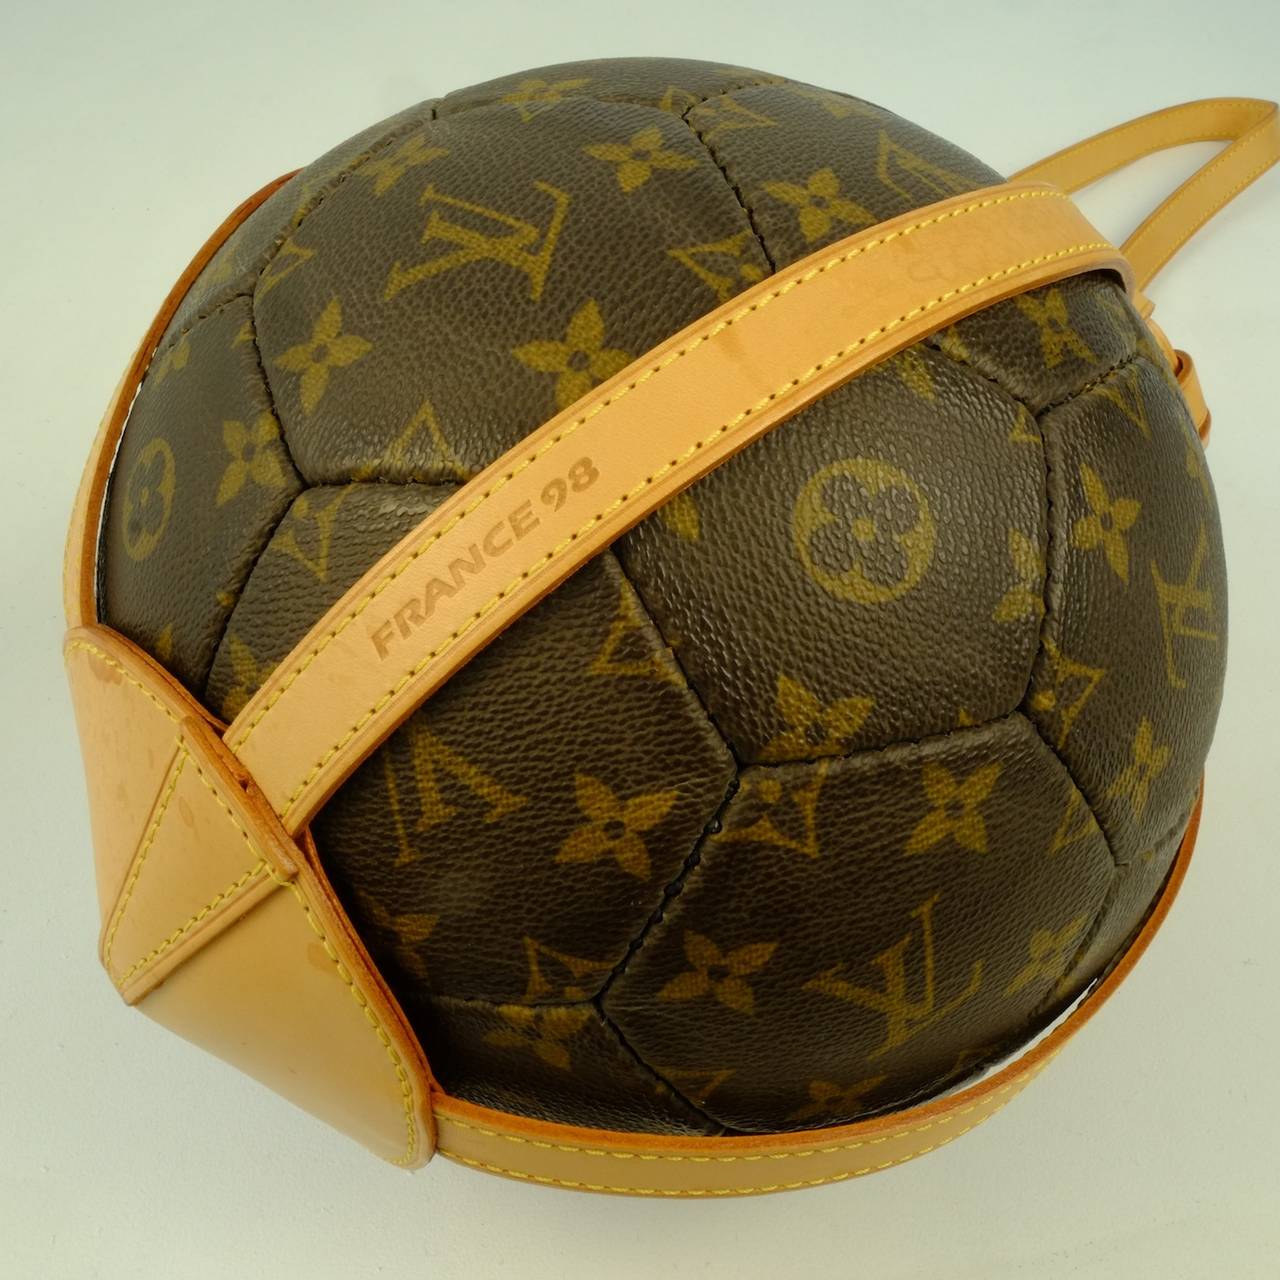 A Louis Vuitton Limited Edition 1998 World Cup Football, The Art of Travel, 2019